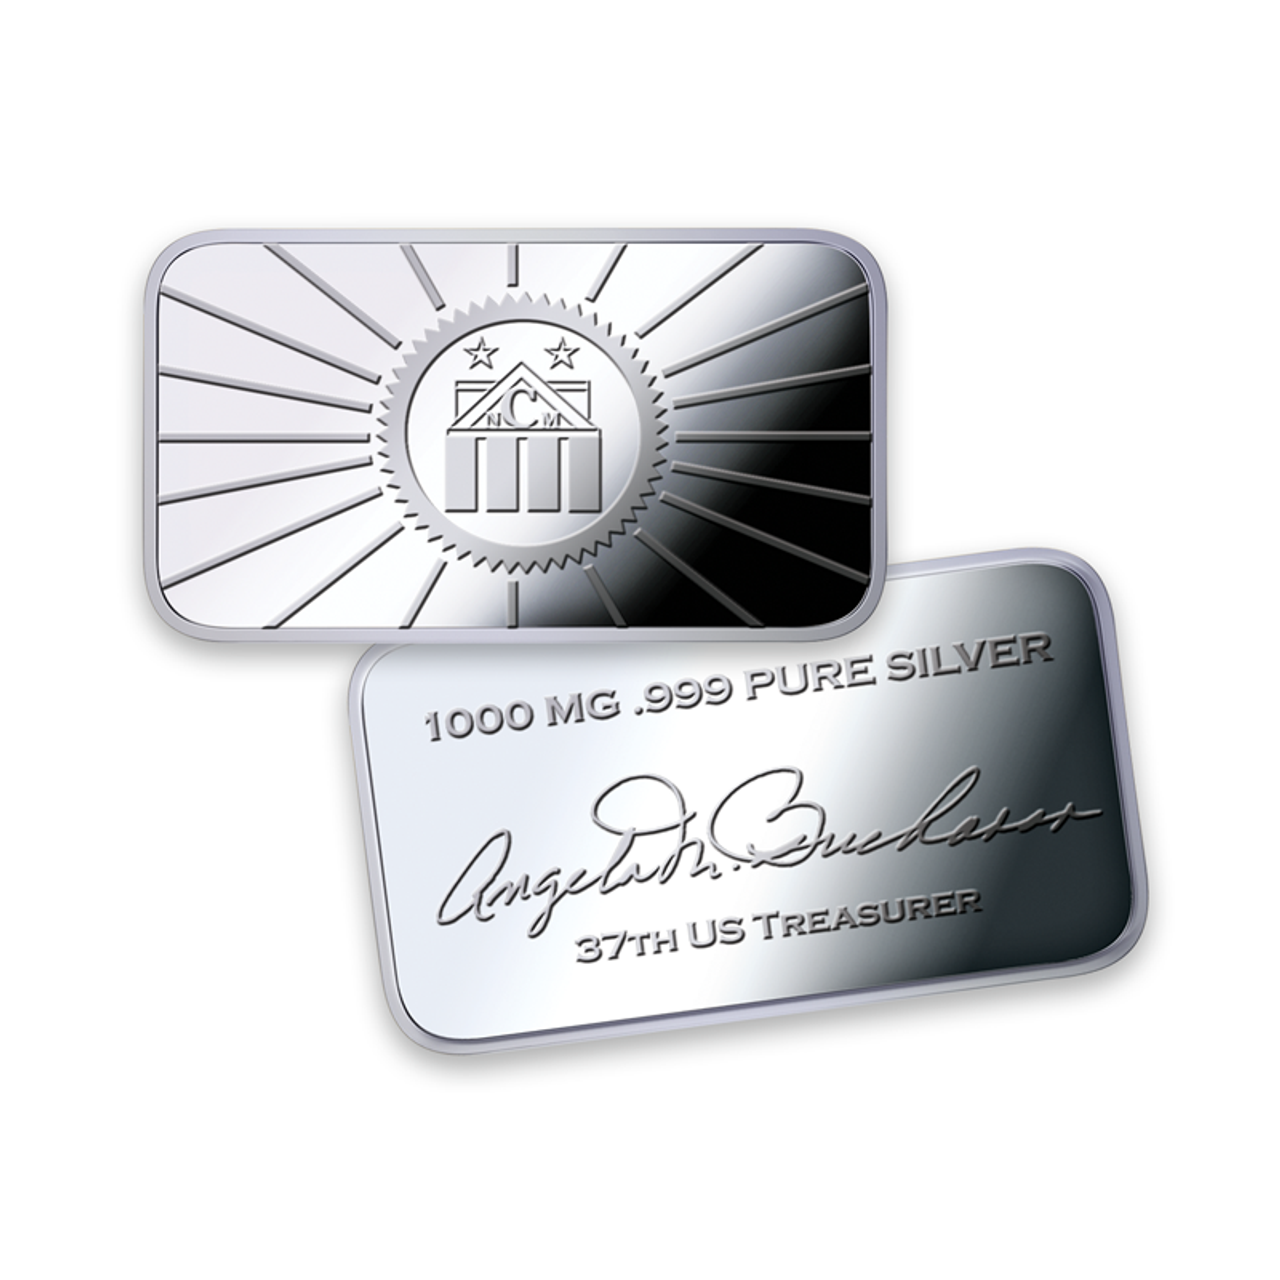 Official NCM .999 Pure Silver Bars - National Collector's Mint